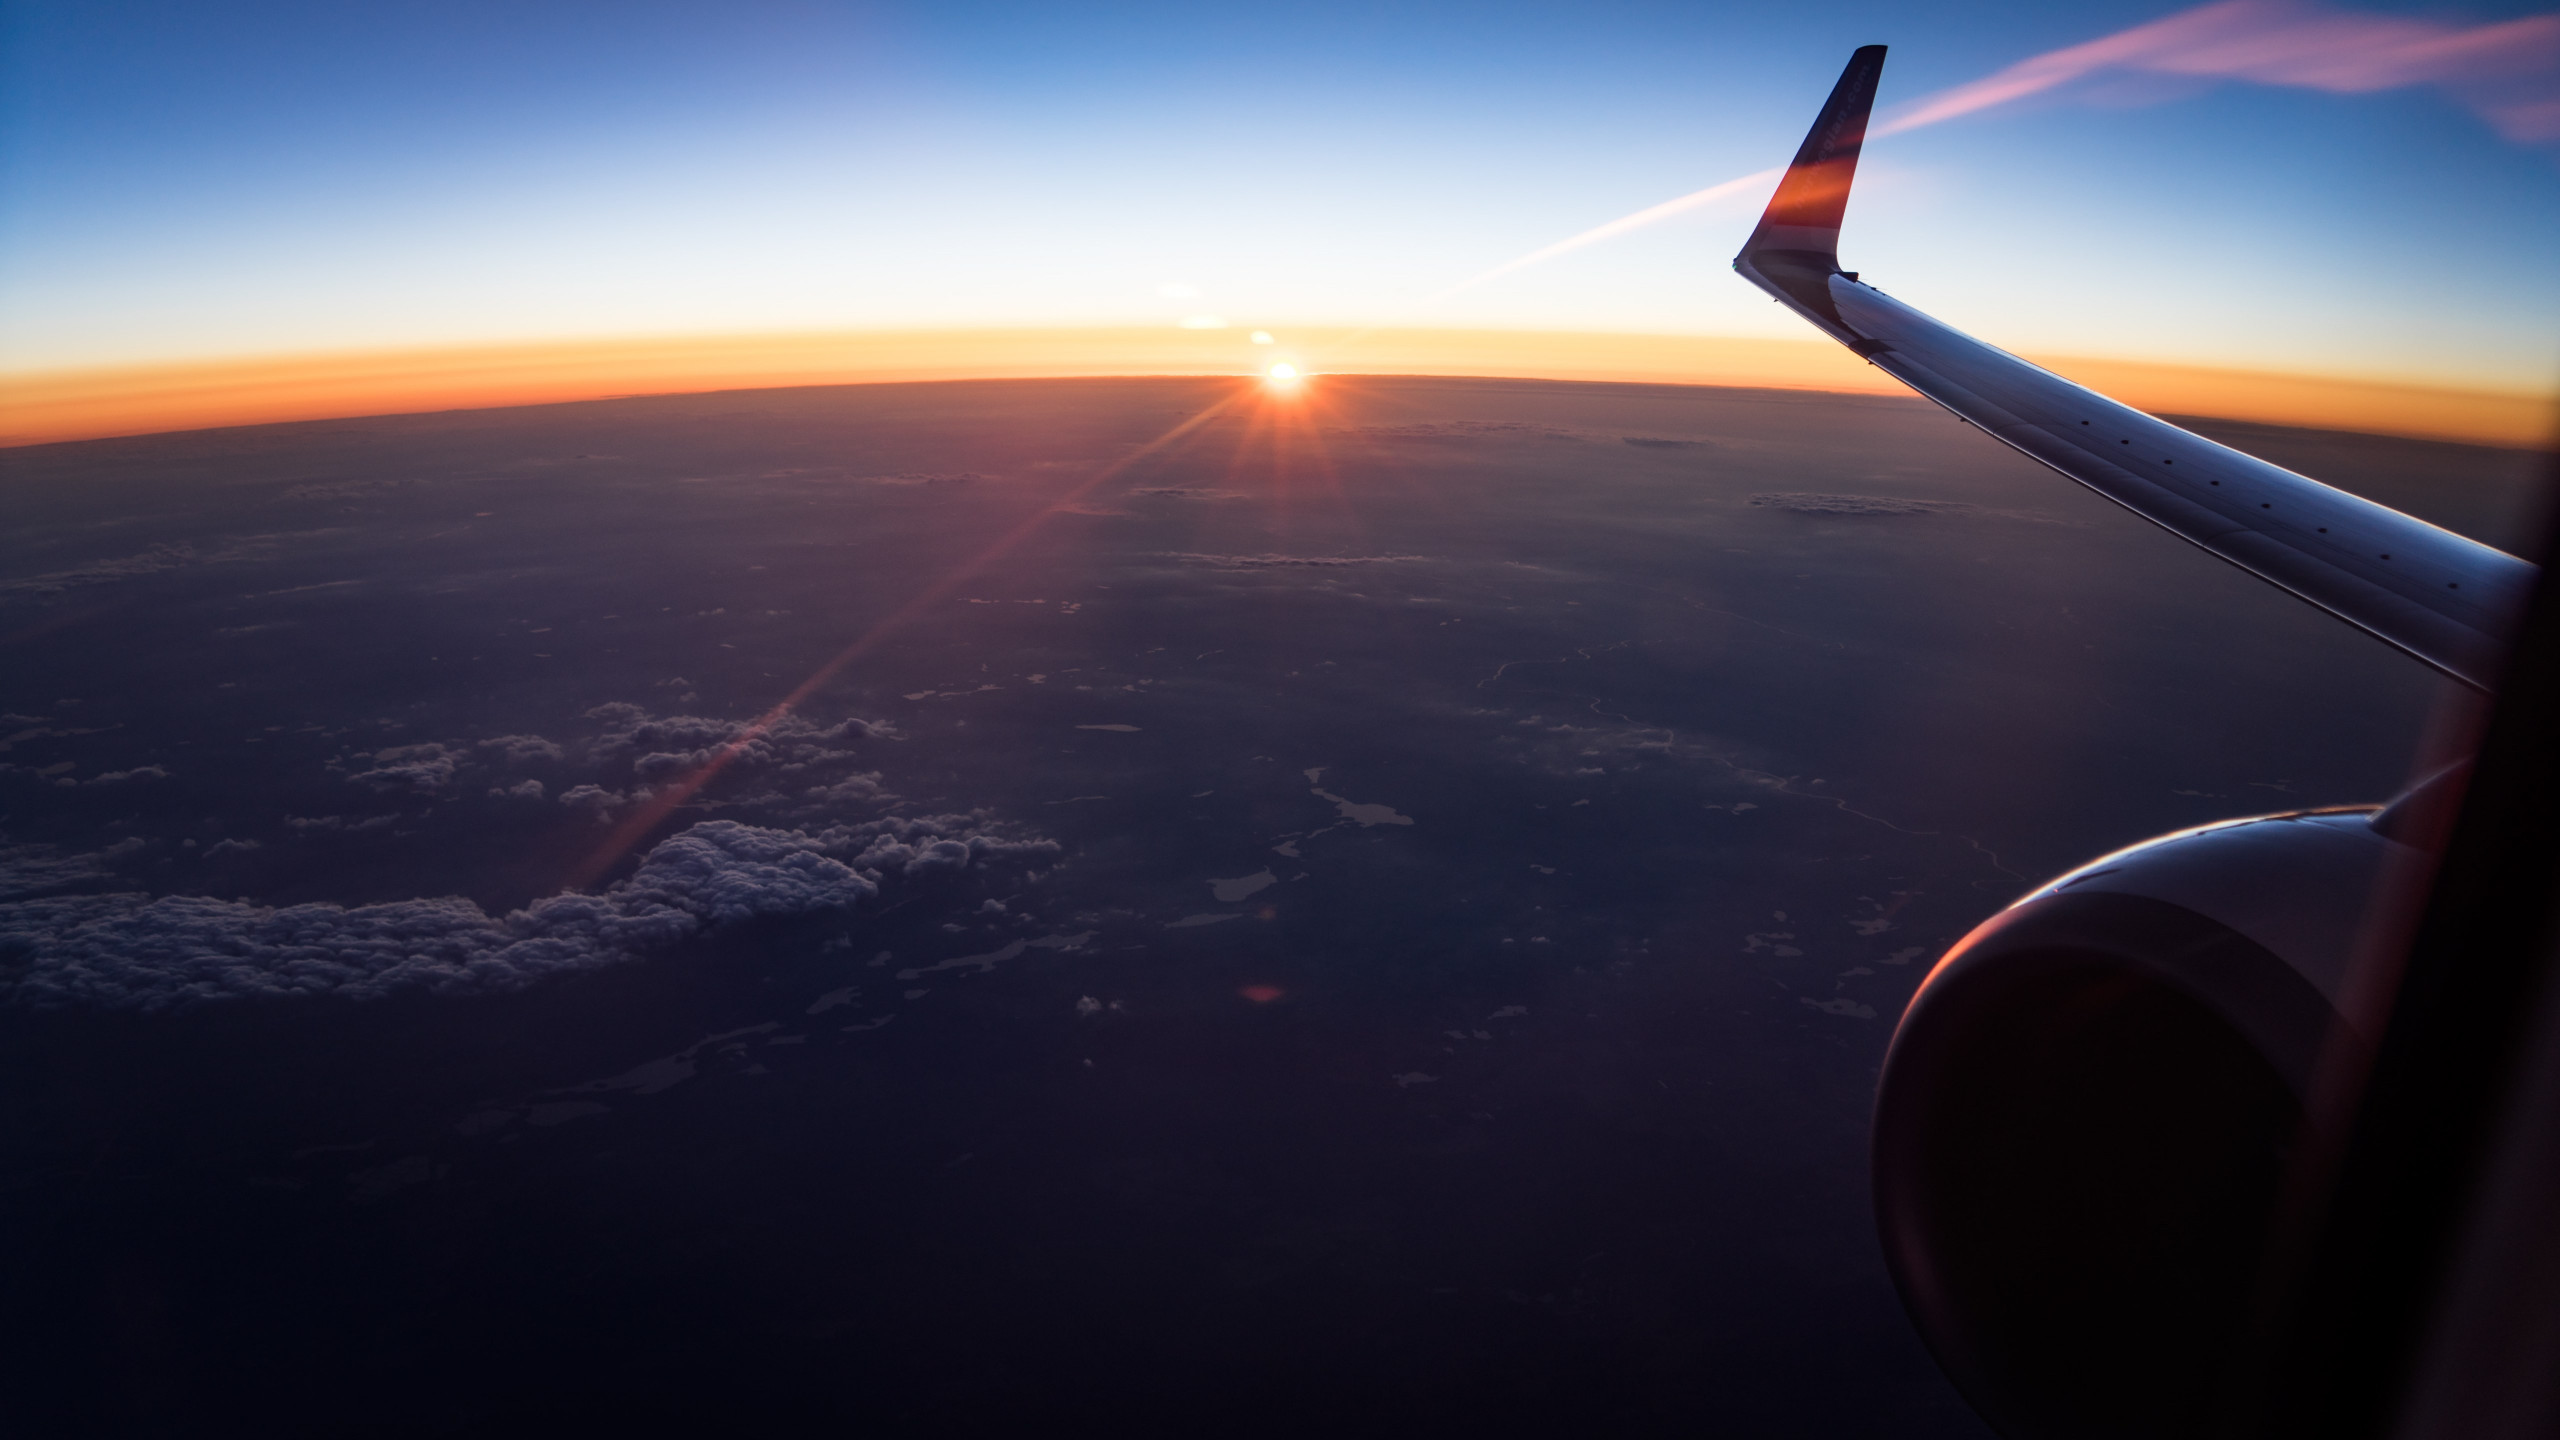 In the plane watching the sunset wallpaper 2560x1440